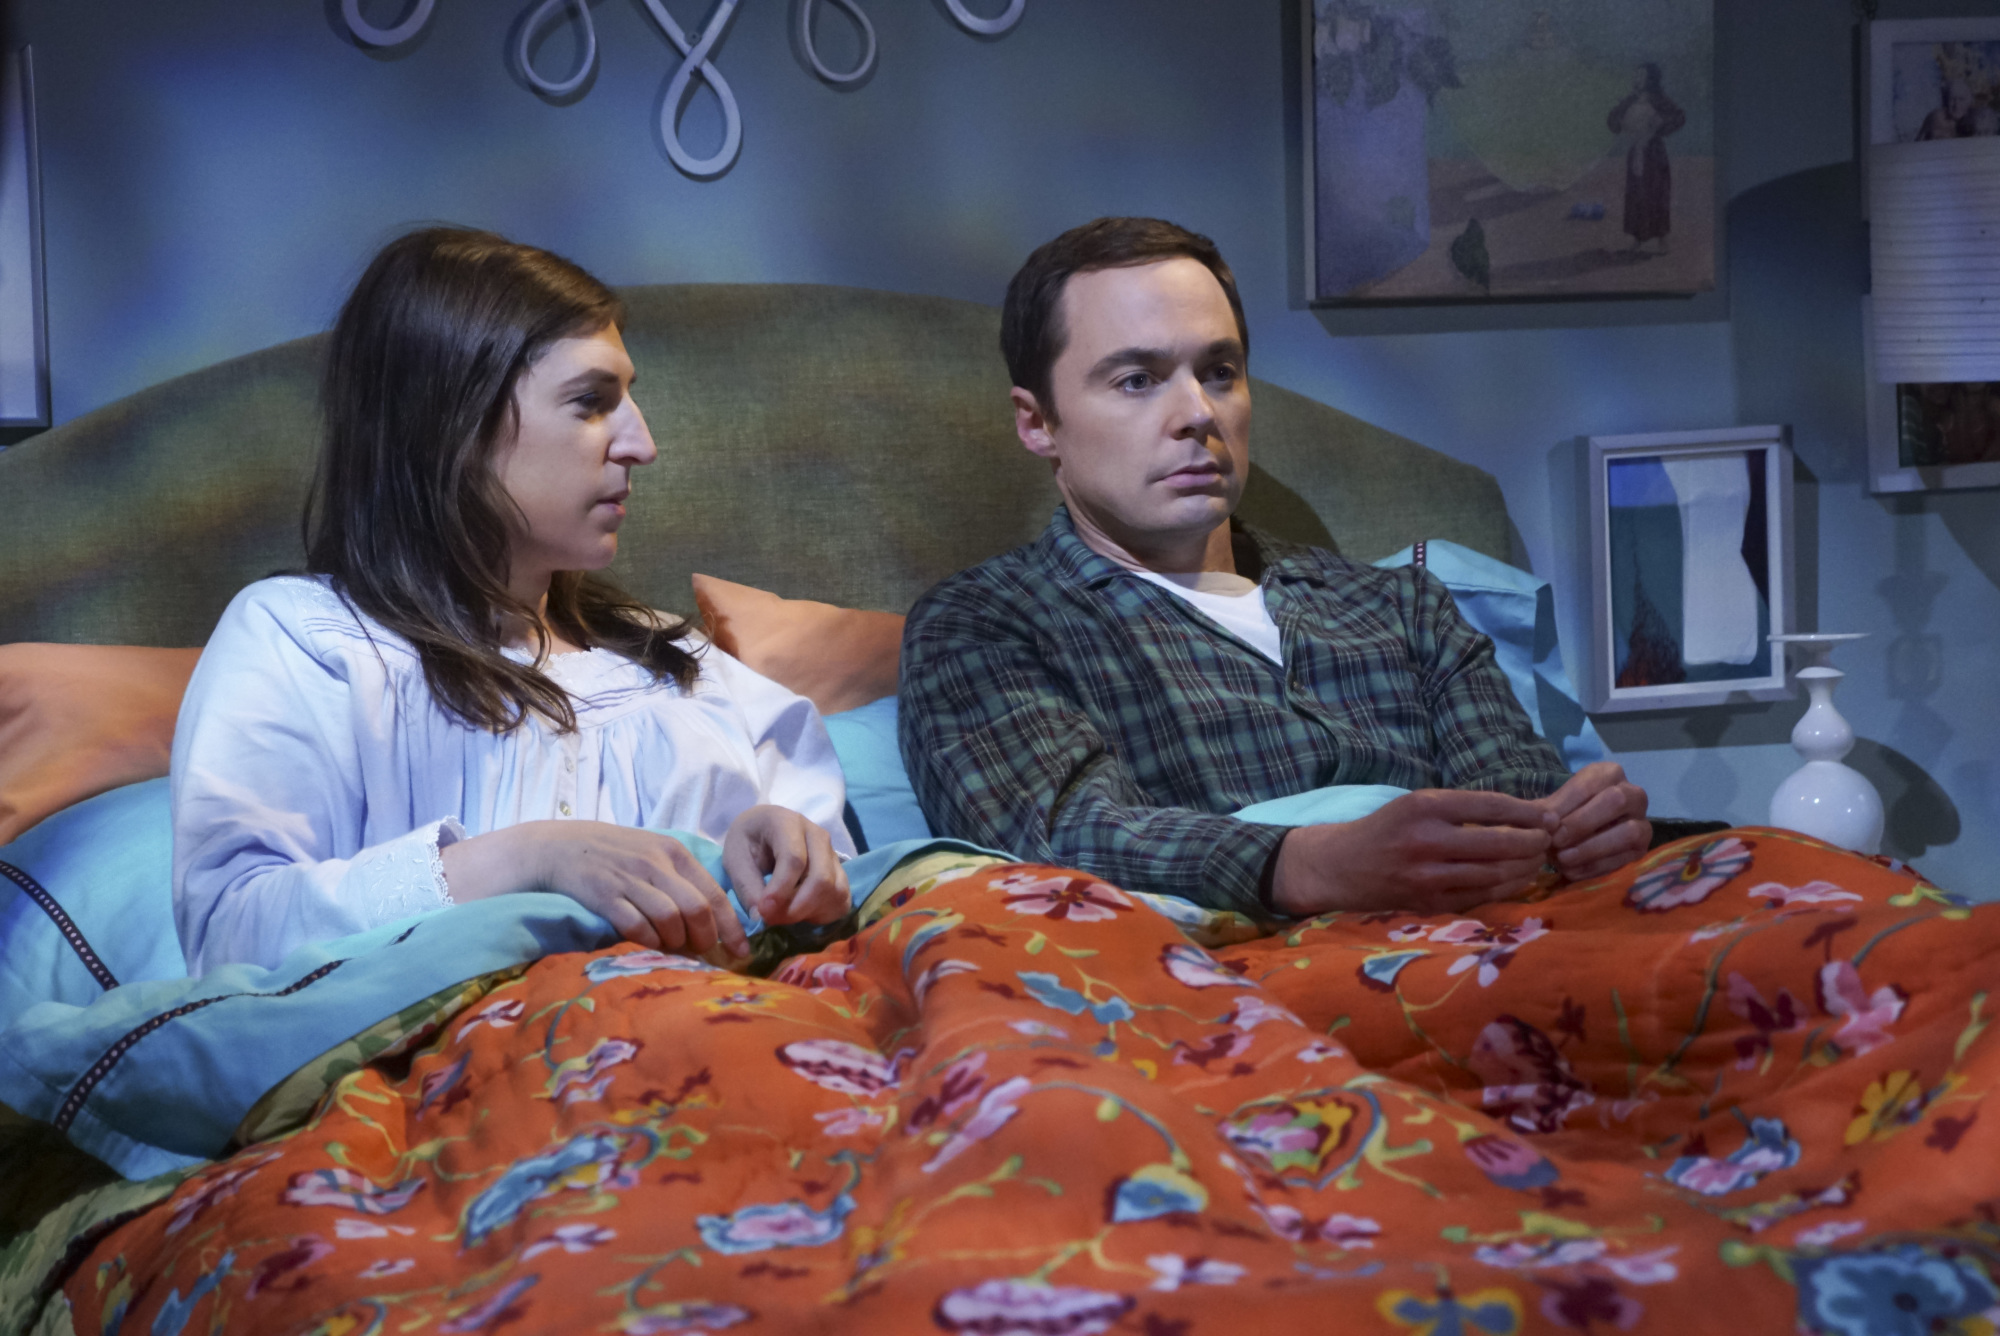 Amy Farrah Fowler and Jim Parsons lay in bed together in 'The Veracity Elasticity' episode of 'The Big Bang Theory